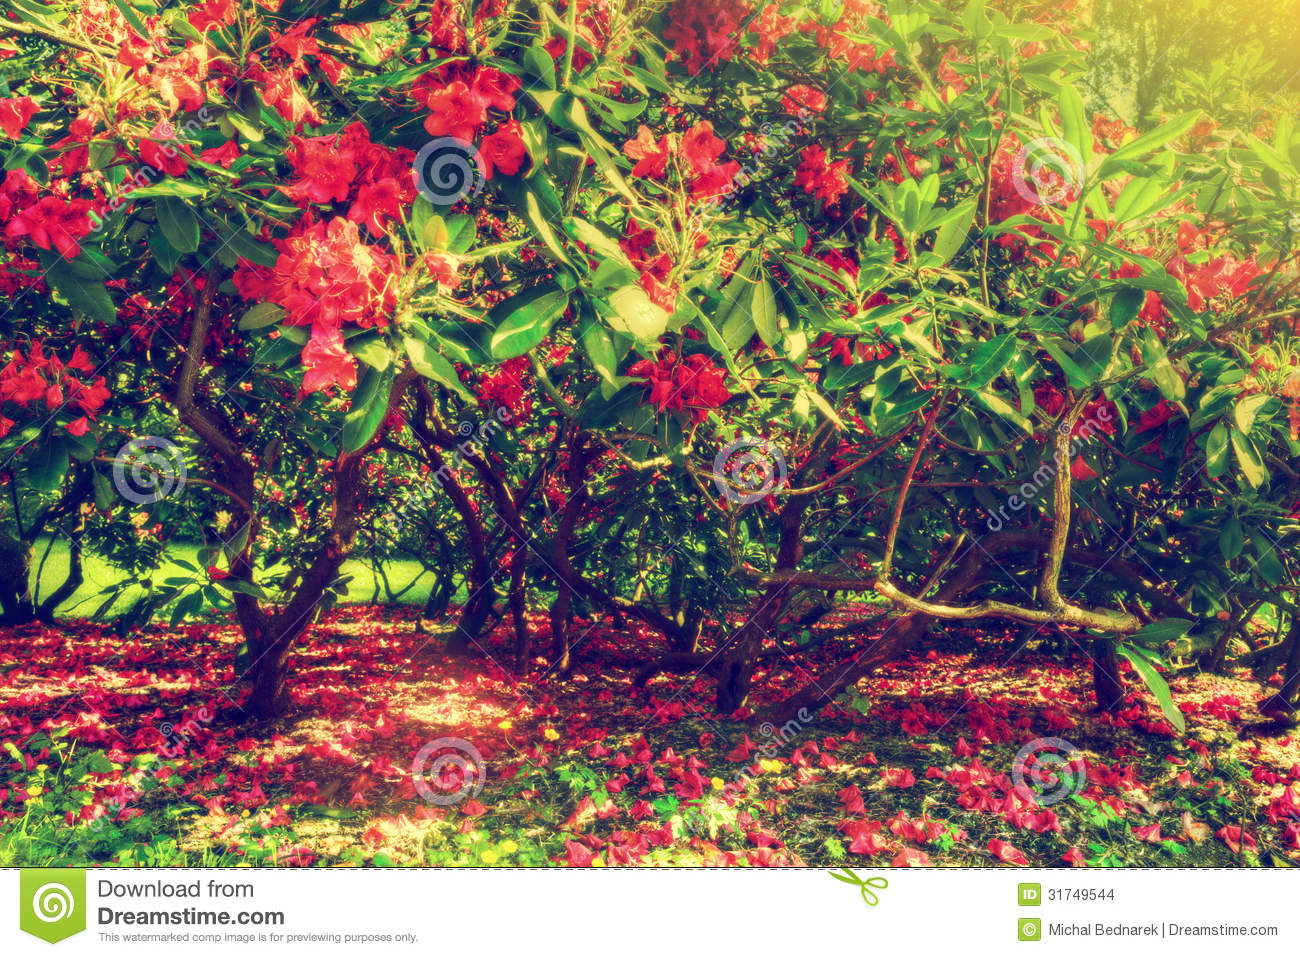 Magnolia Trees And Flowers In Park Sun Shining Stock Images   Image